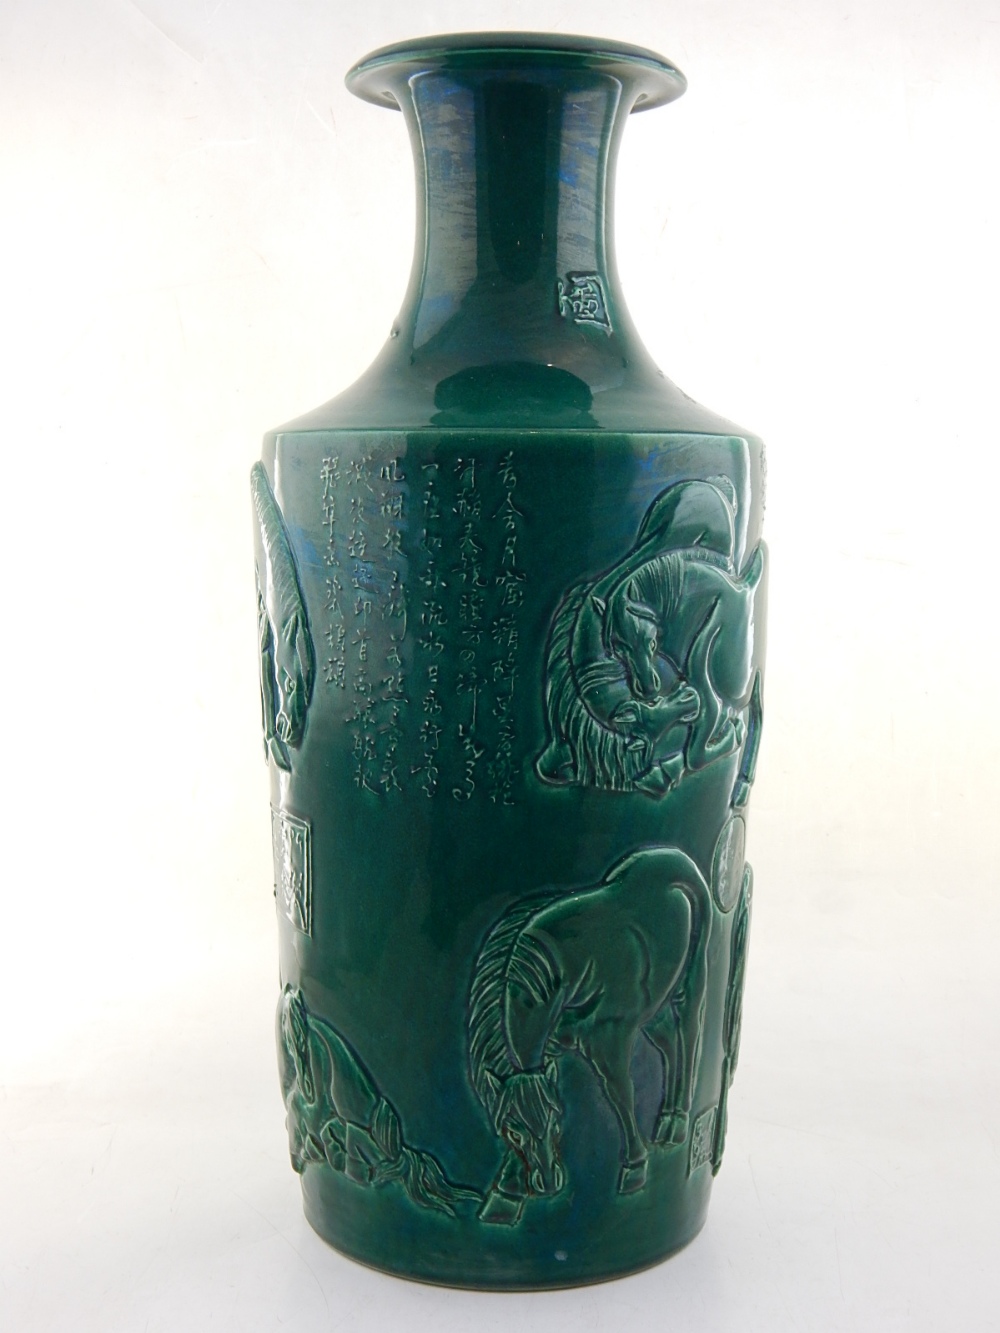 A Chinese green glazed porcelain vase, the body moulded with horses and script, H. 47cm.